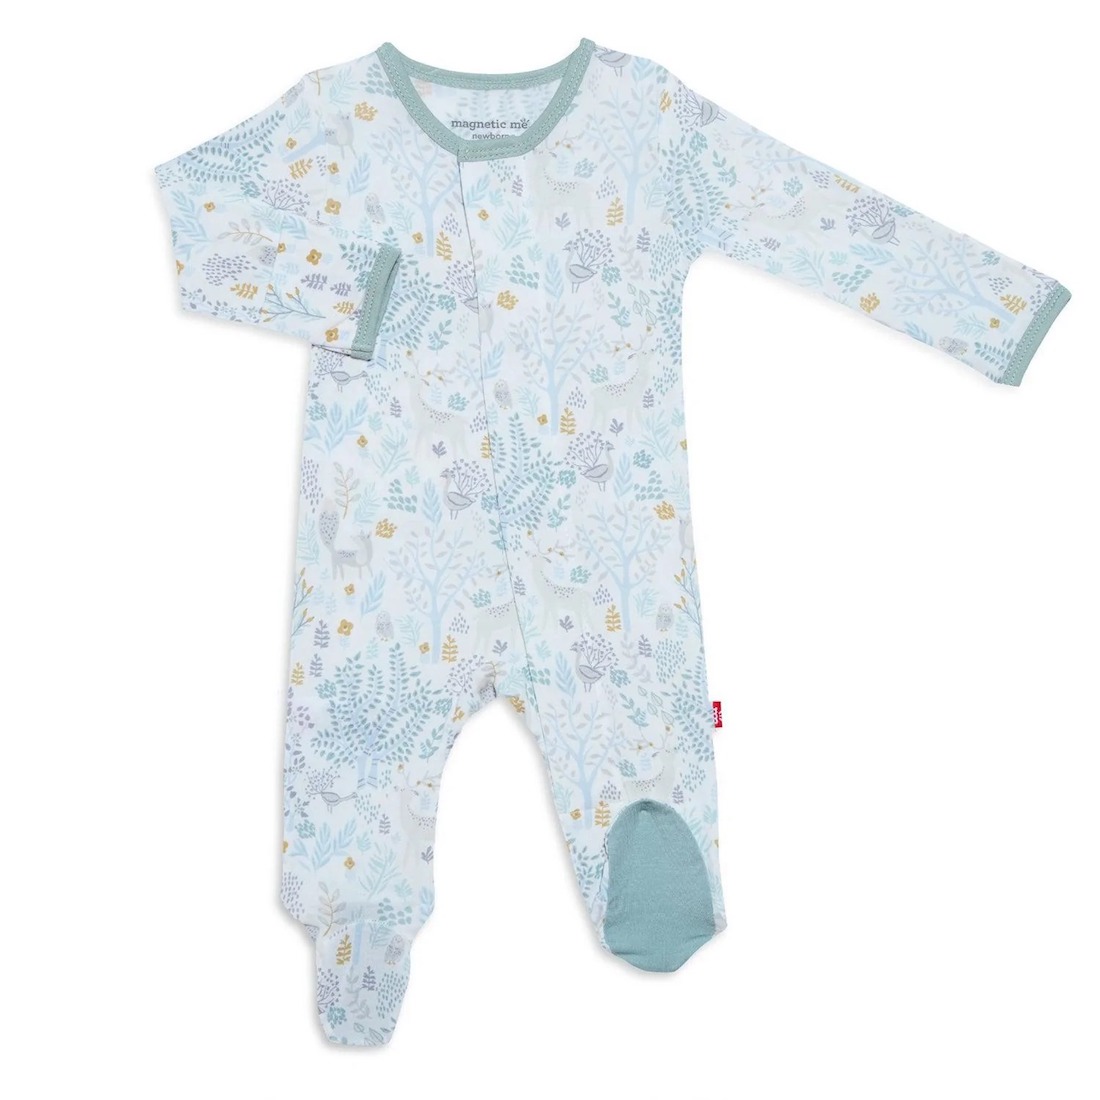 Magnetic Me imagine forest modal magnetic footie - 0-3 Months